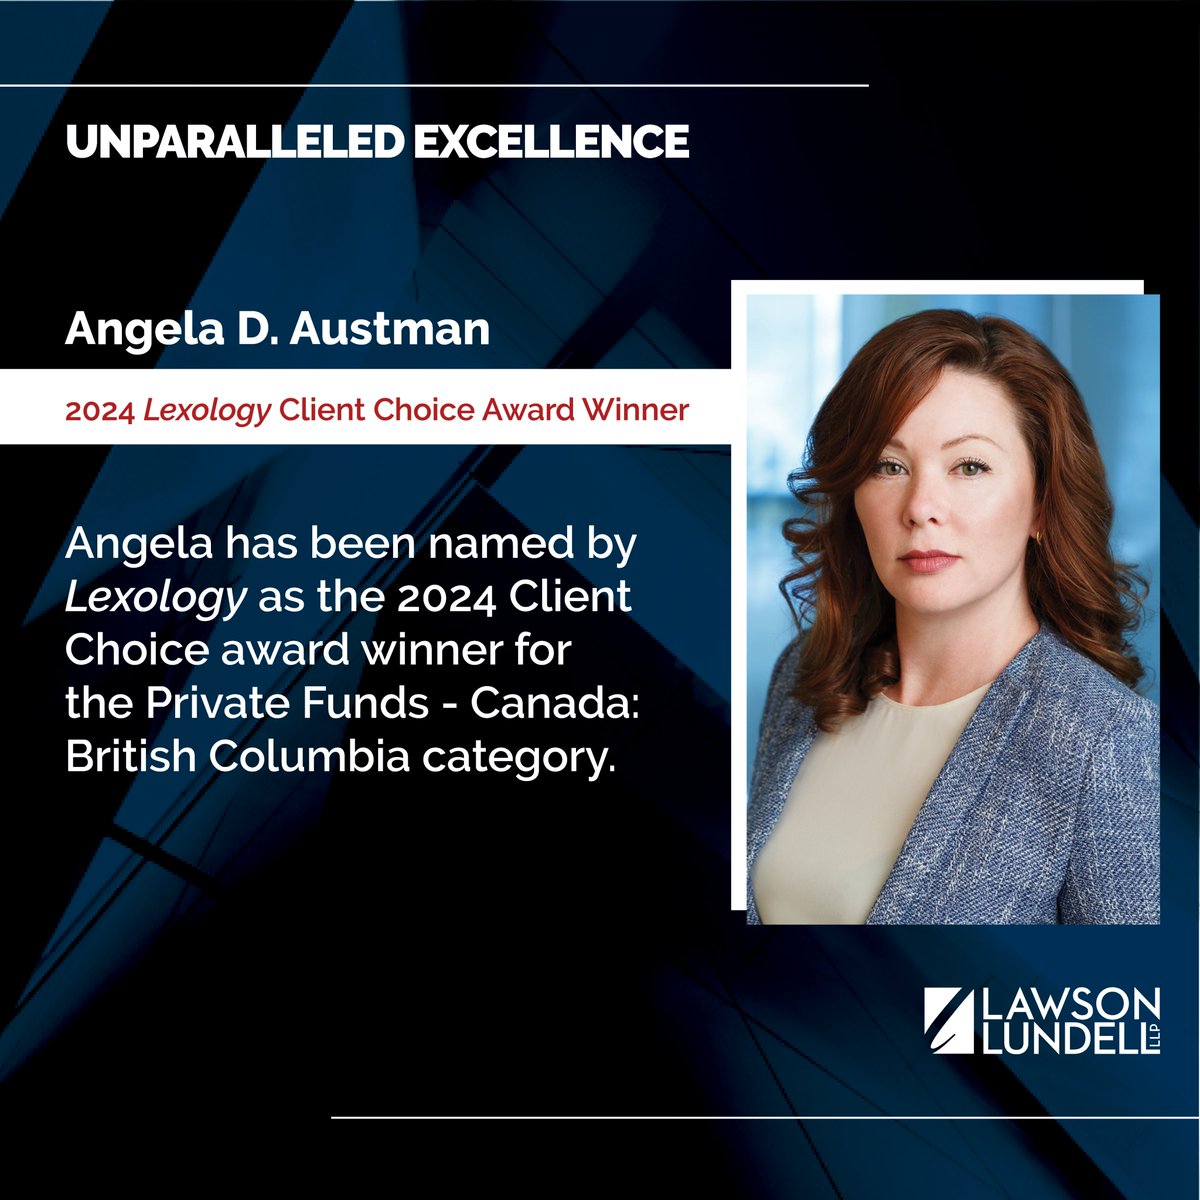 We are pleased to announce that Lawson Lundell lawyer Angela Austman has been named by @lexology as the 2024 Client Choice award winner for the Private Funds - Canada: British Columbia category. To learn more, click here: lawsonlundell.com/newsroom-news-…